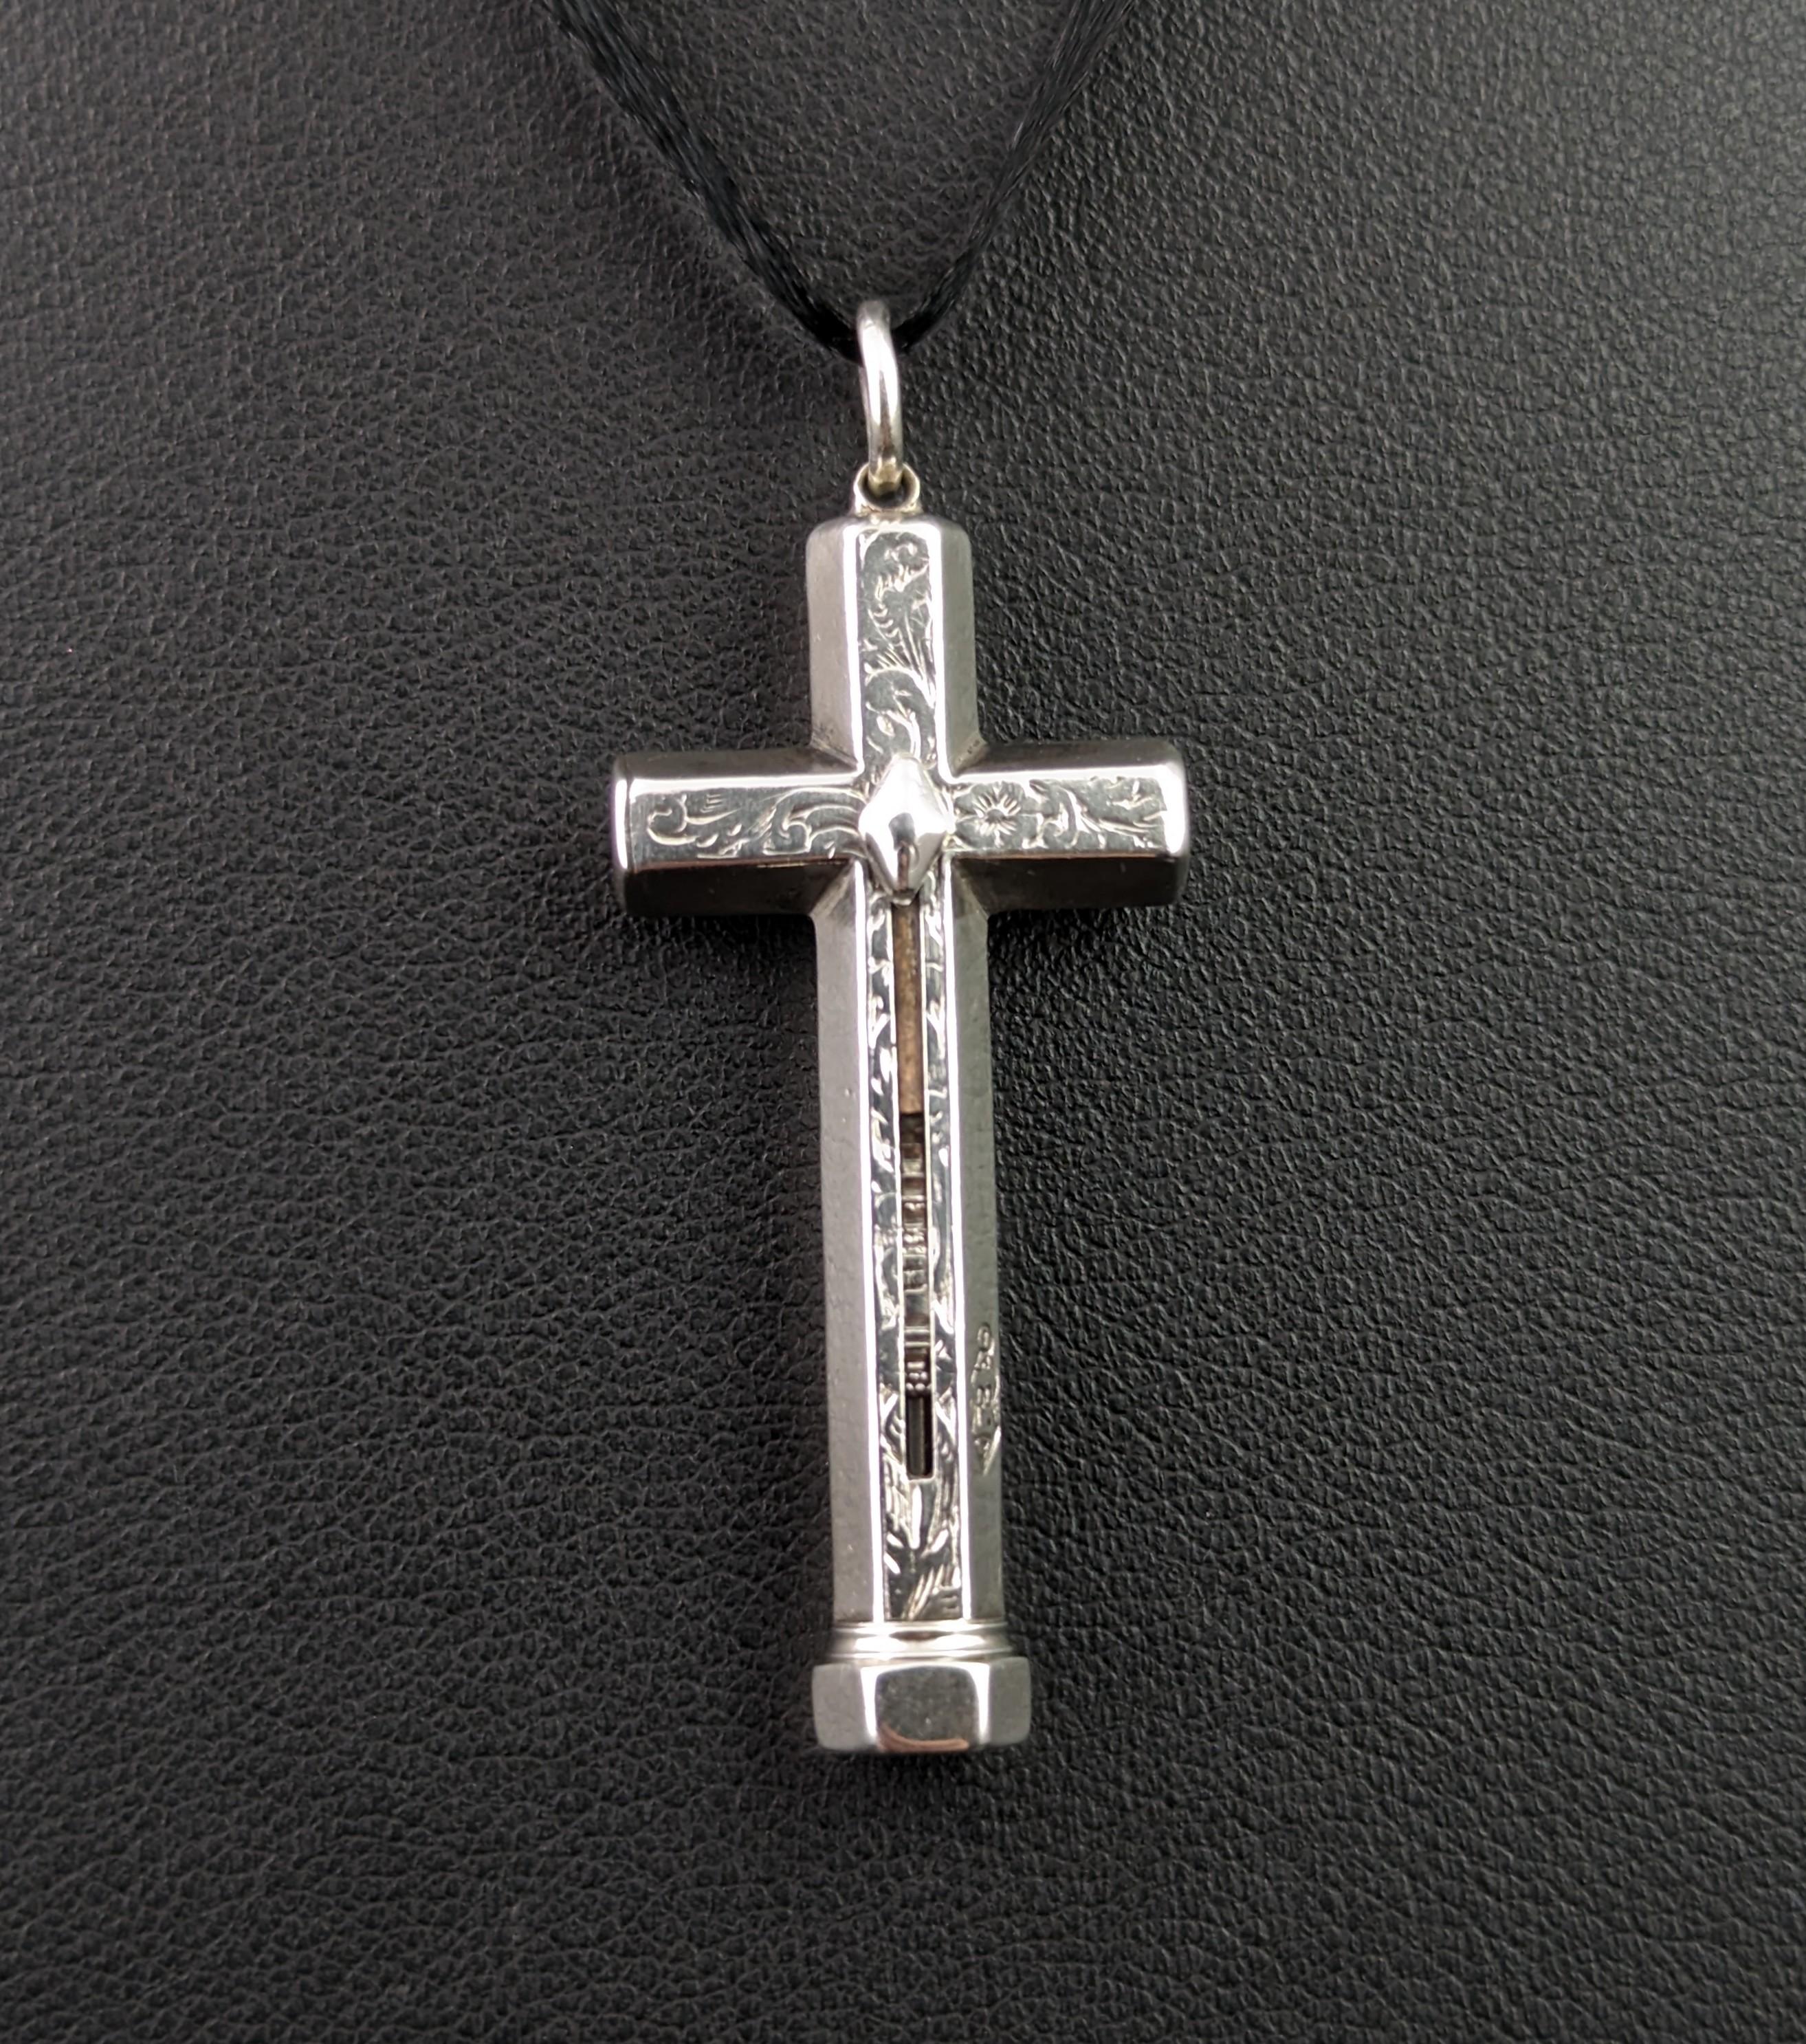 This spectacular antique Silver cross pendant hides a special feature, it is not only a gorgeous antique pendant but also a Propelling pencil.

An unusual design, very well made by a renowned manufacturers of the era Sampson and Mordan.

It has has